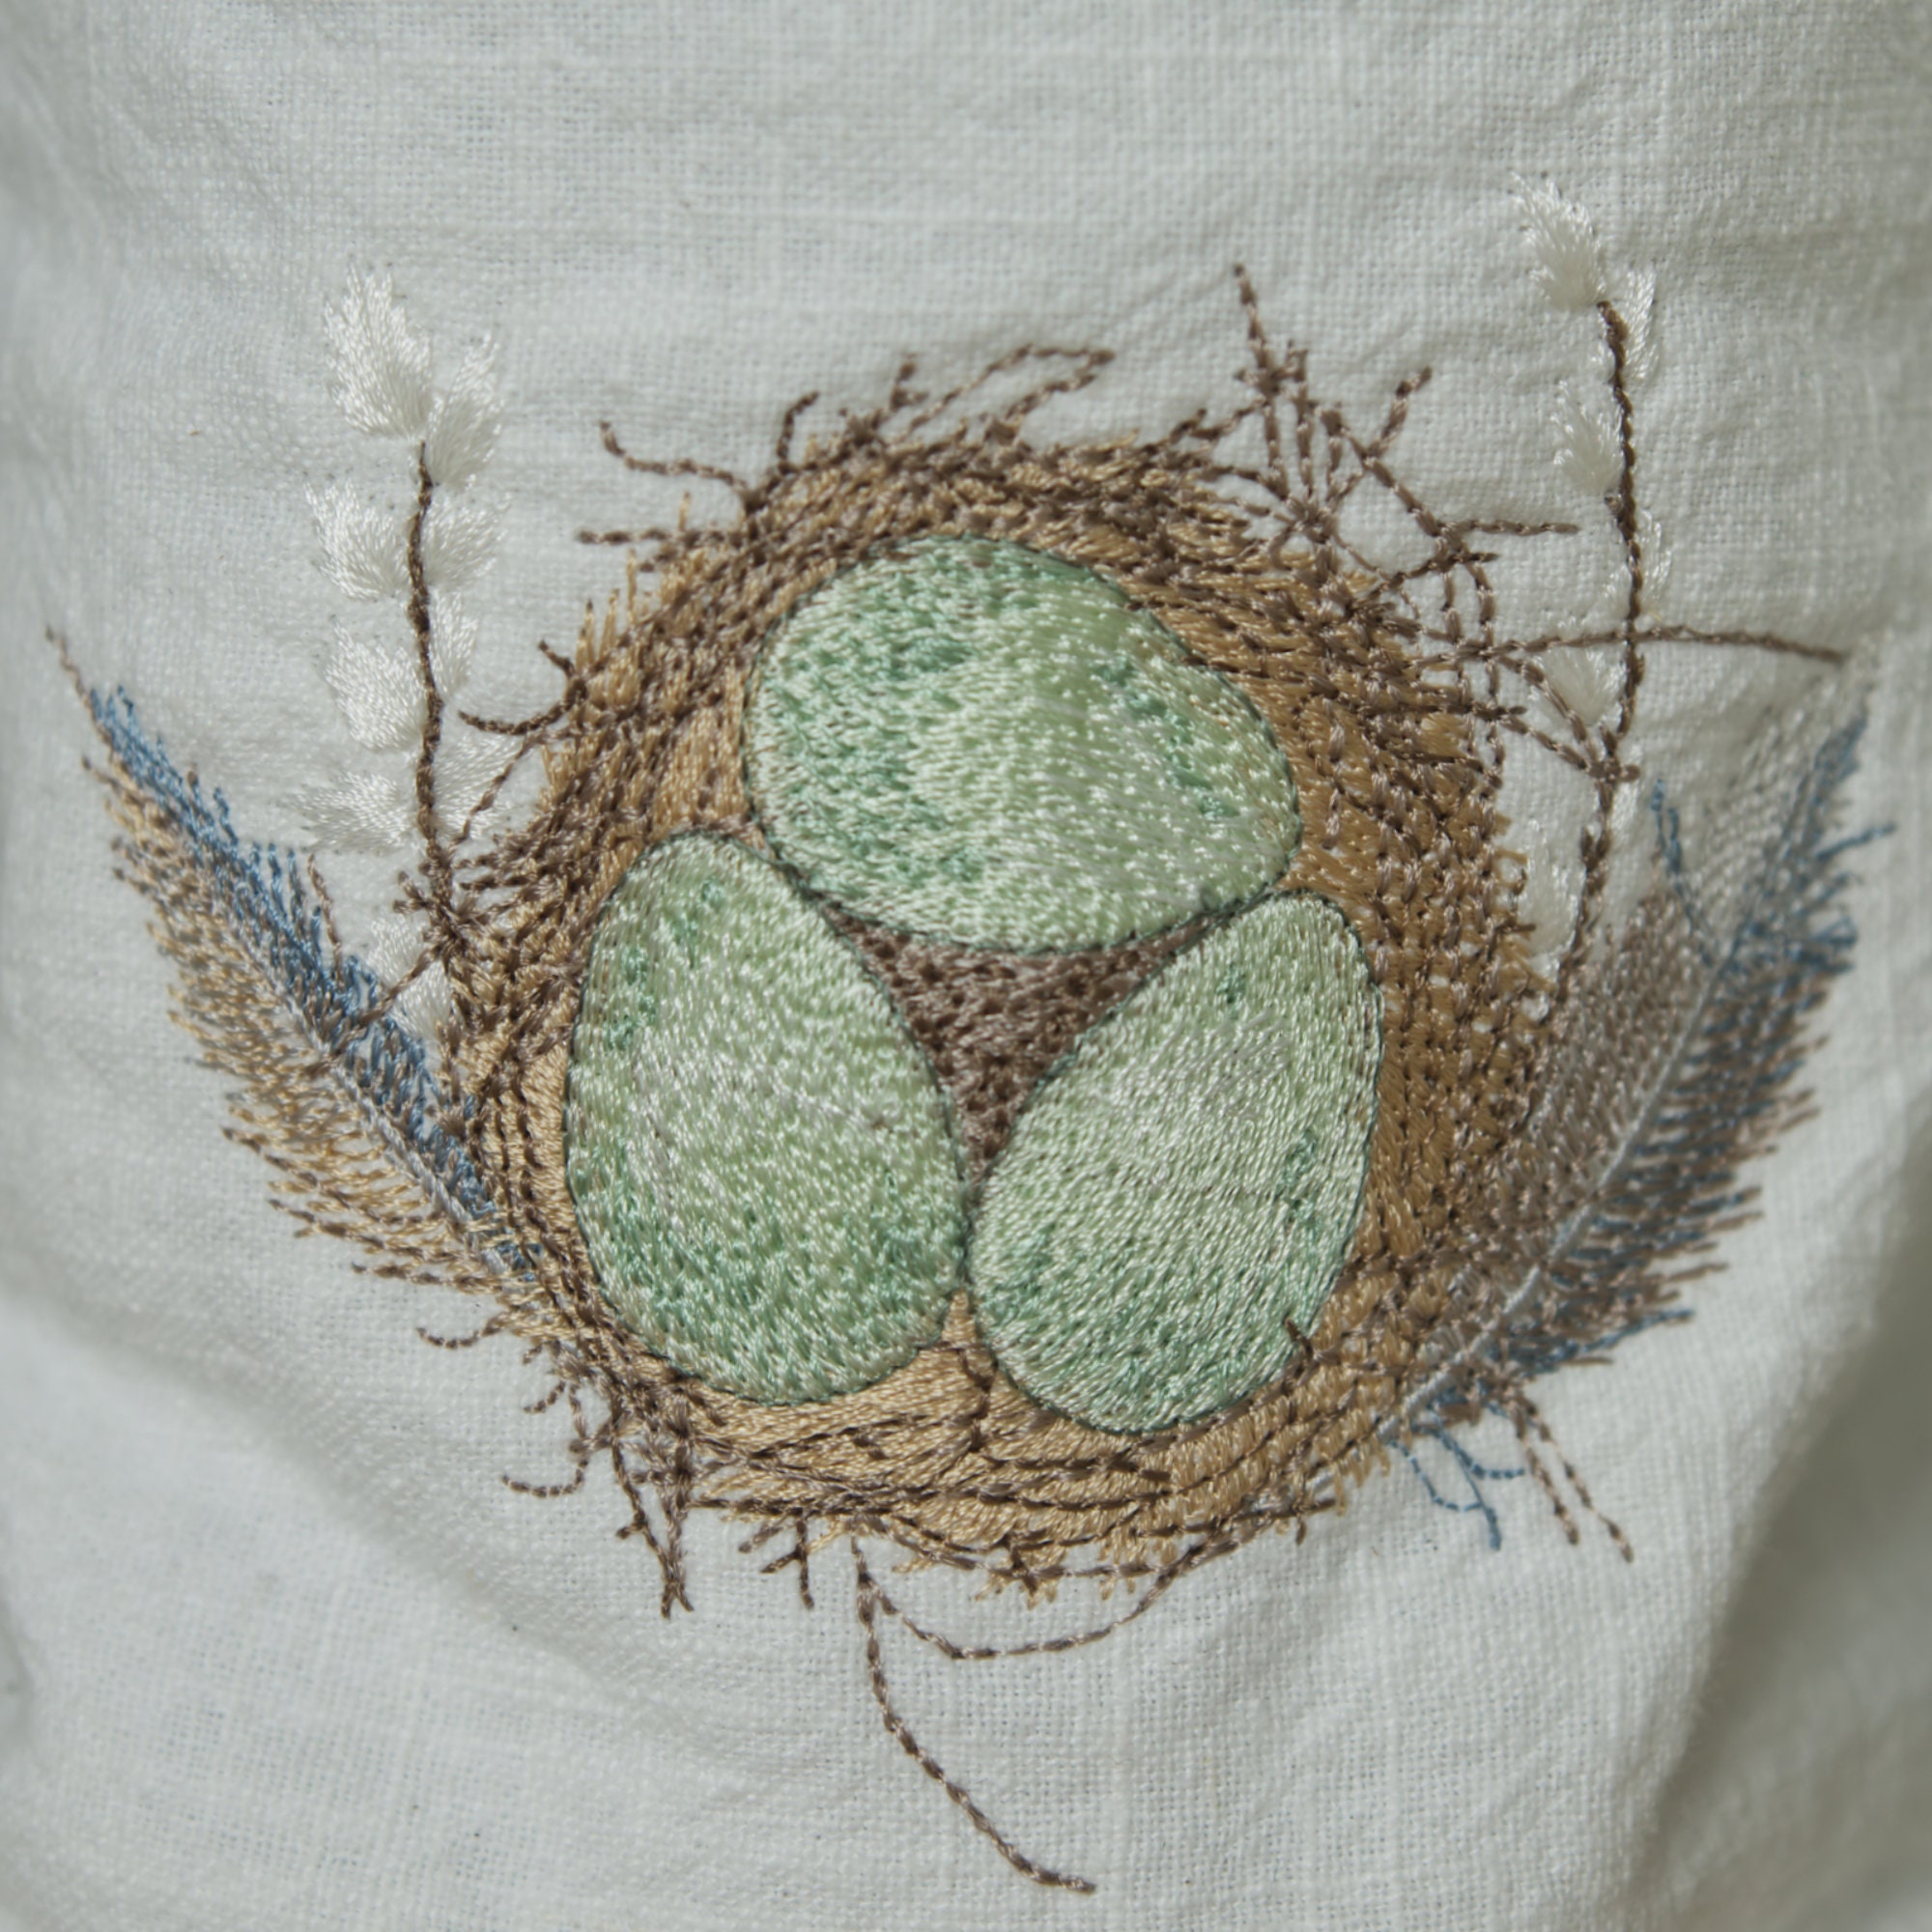 Bird's Nest Embroidery Pattern  Embroidery patterns, Water soluble fabric,  Fabric projects